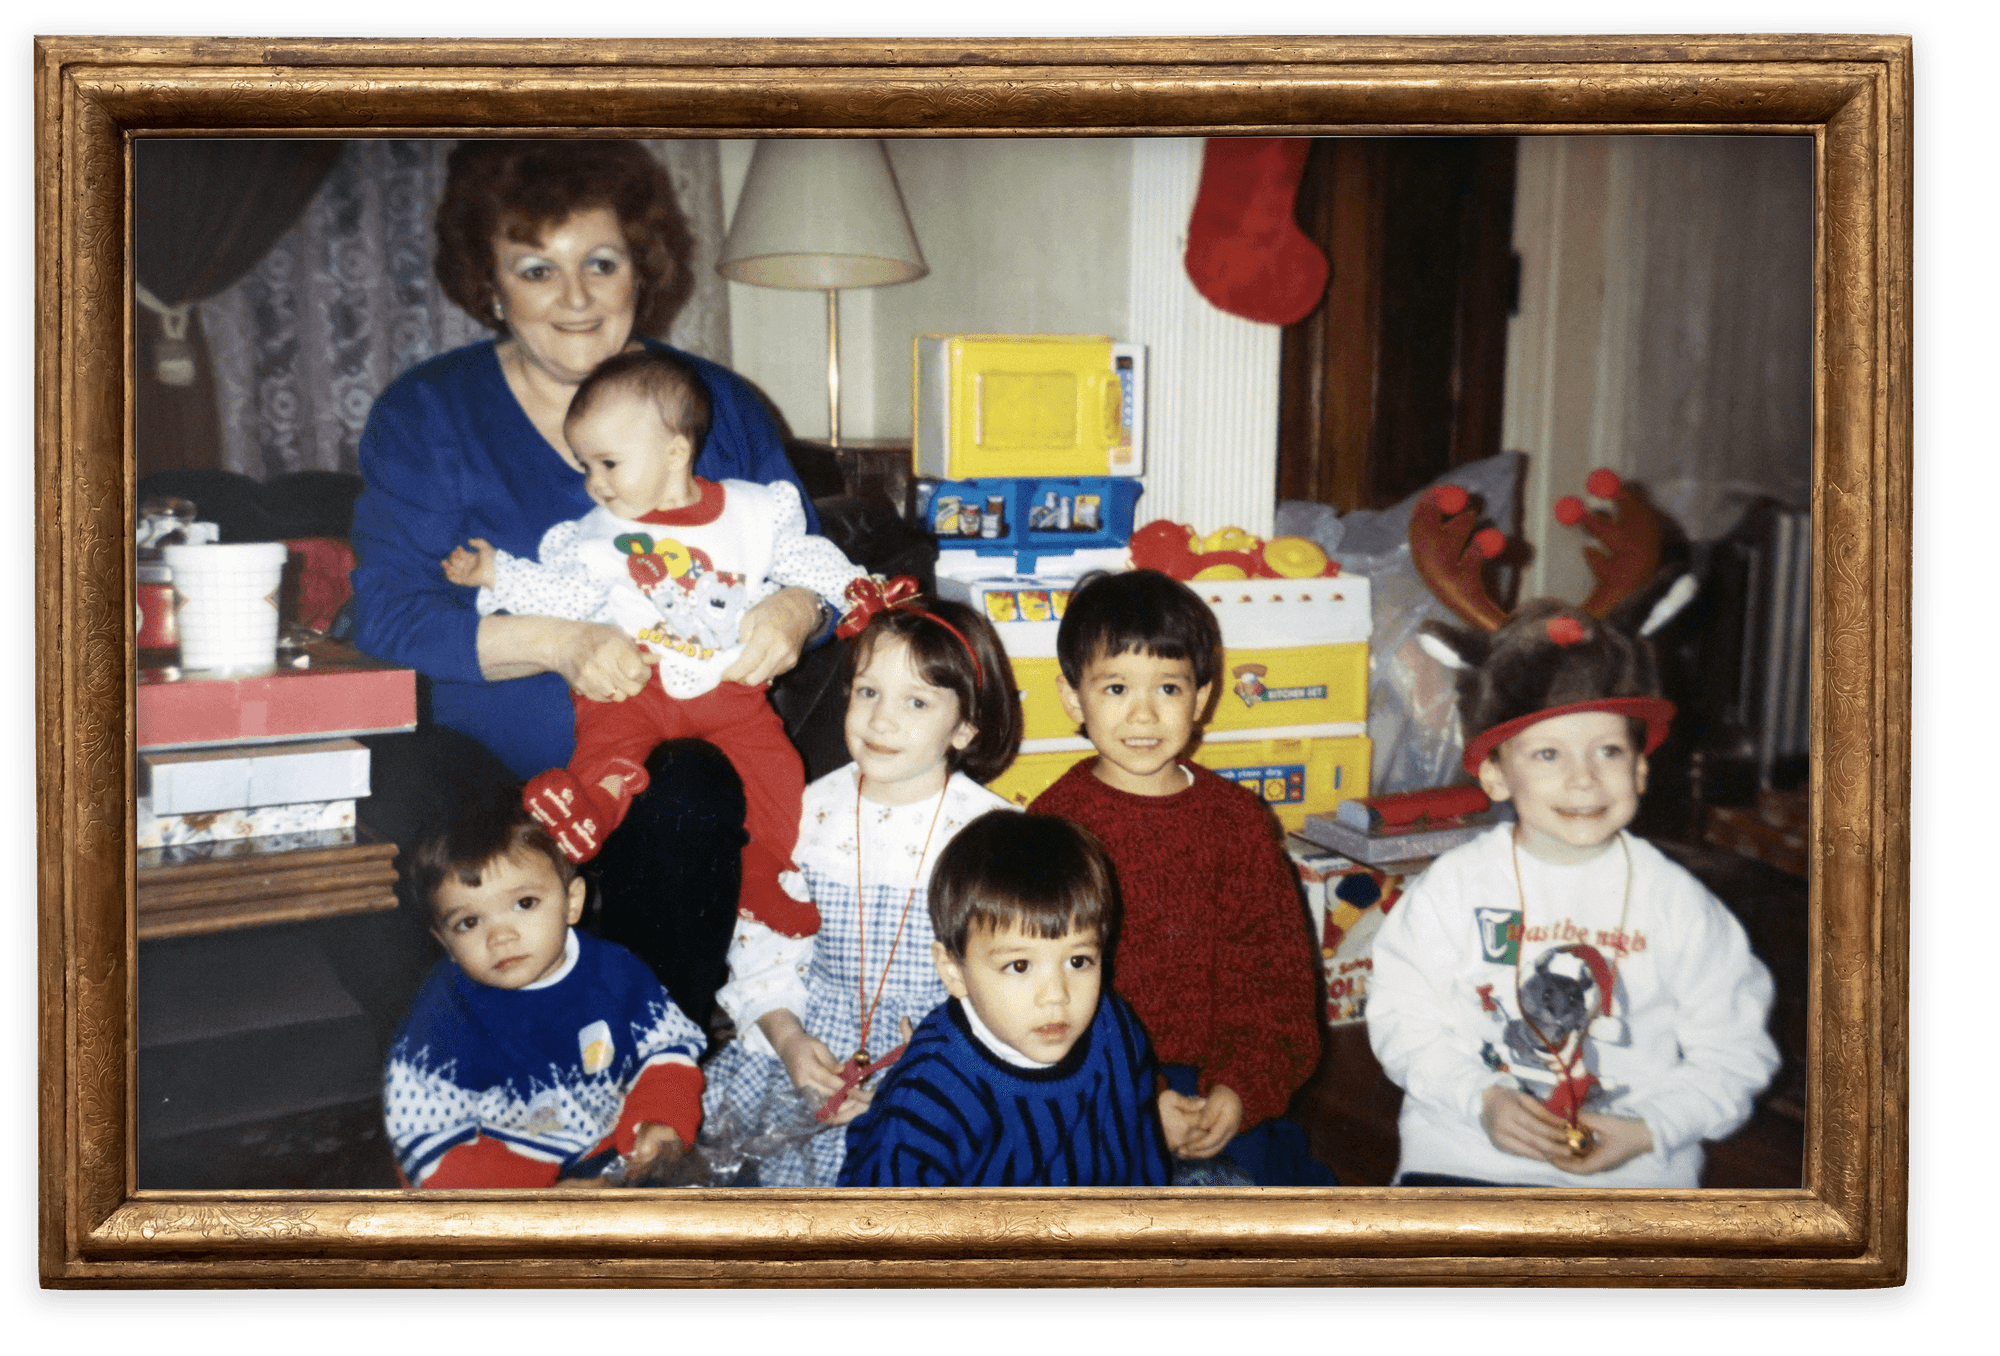  Mary Logue holds her granddaughter, Amanda, as she sits with her grandchildren — James, Catherine, Justin, Brendan, and Michael (left to right) — in 1992. 
